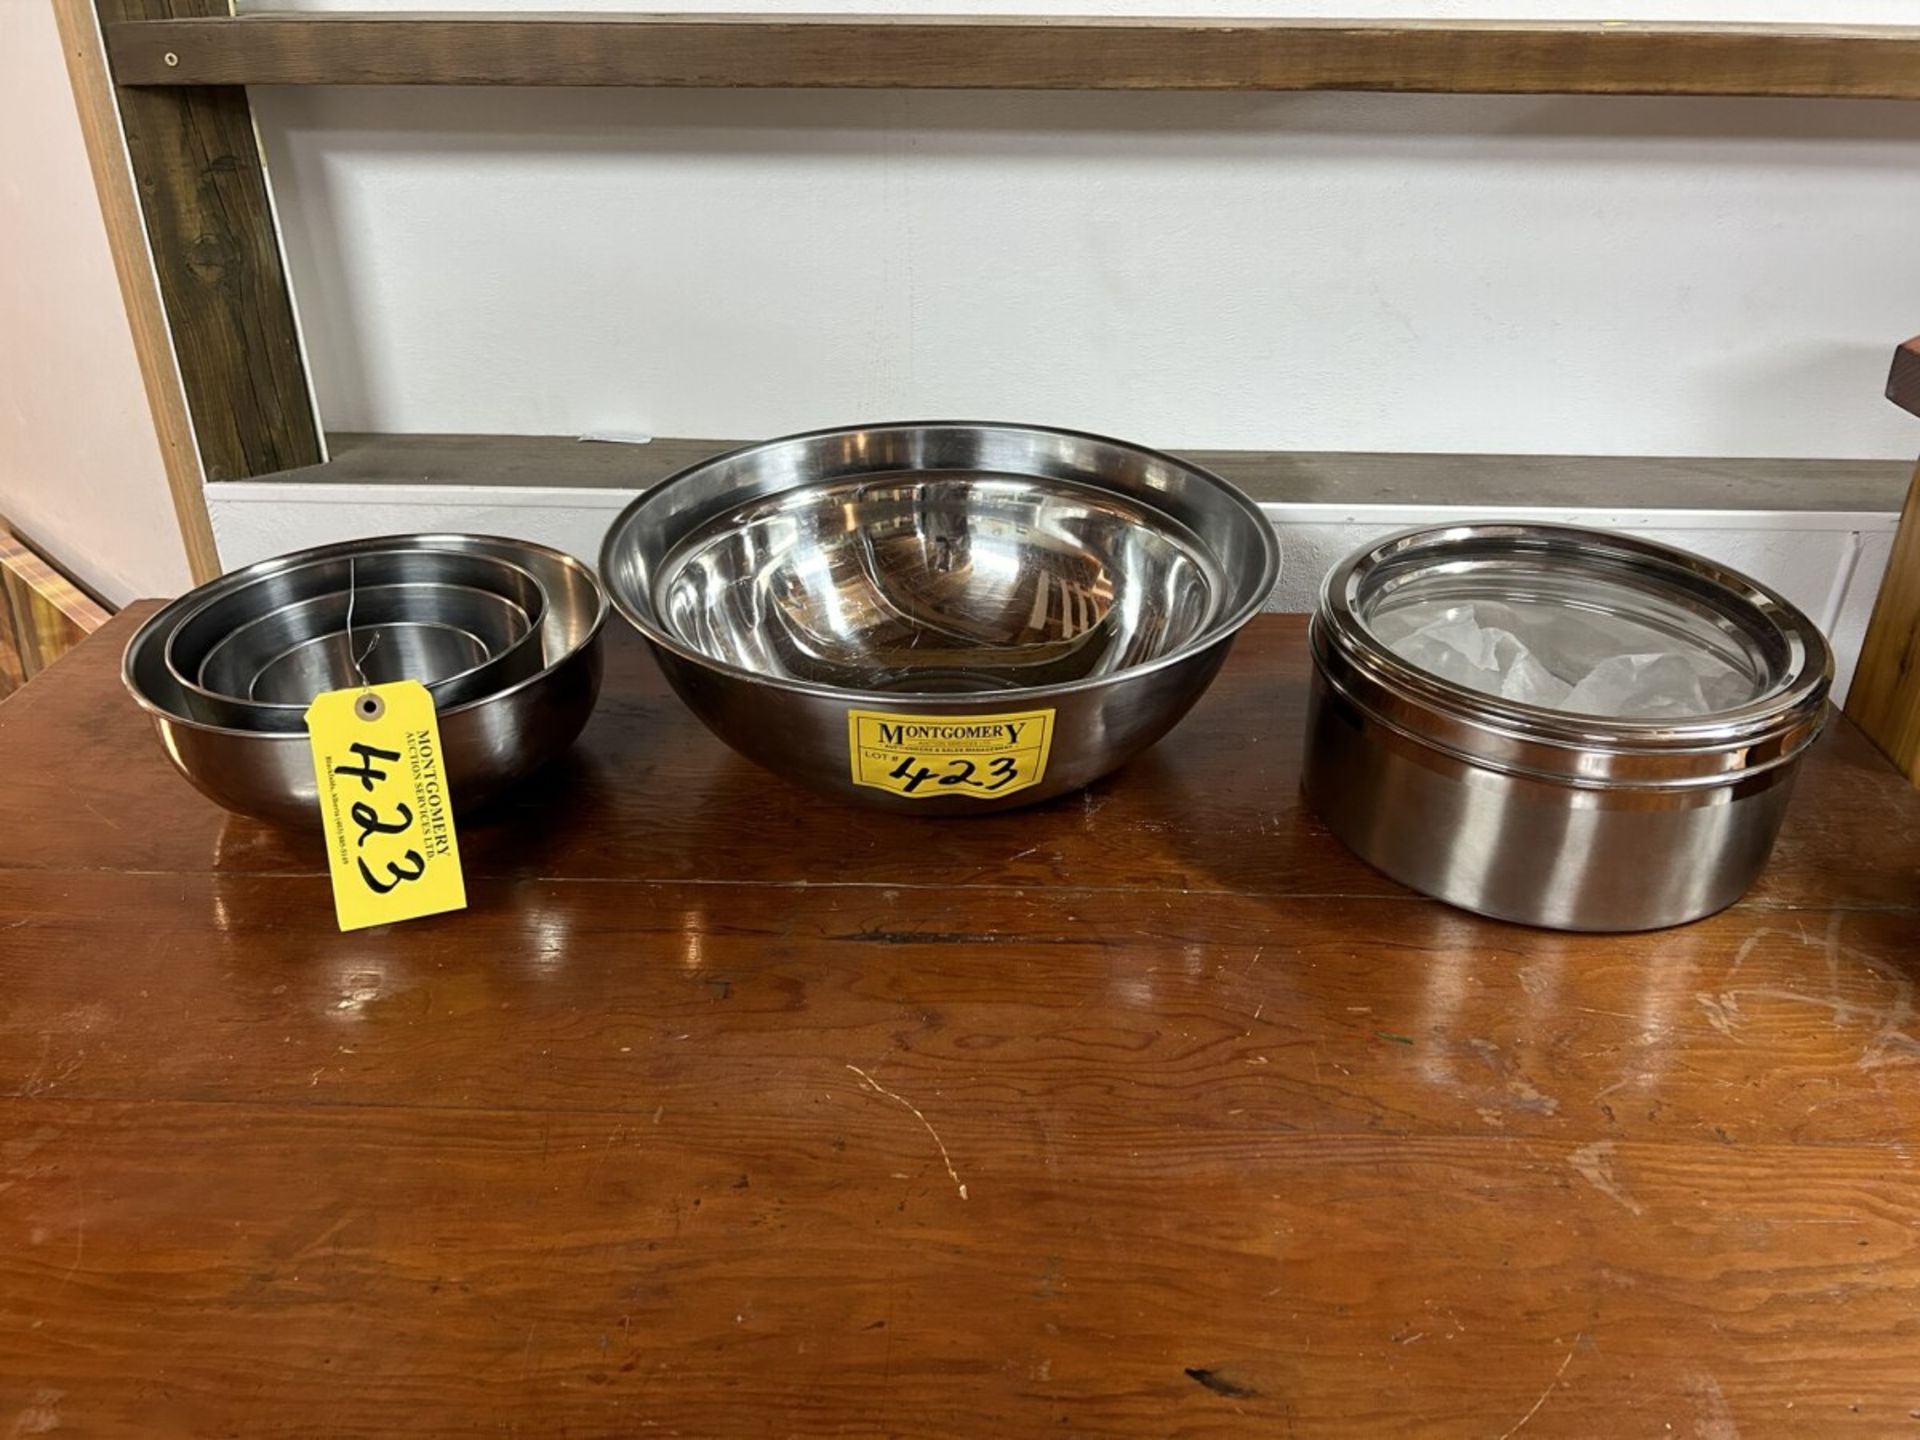 L/O ASSORTED STAINLESS STEEL BOWLS, STANLESS STEEL STACKING TINS